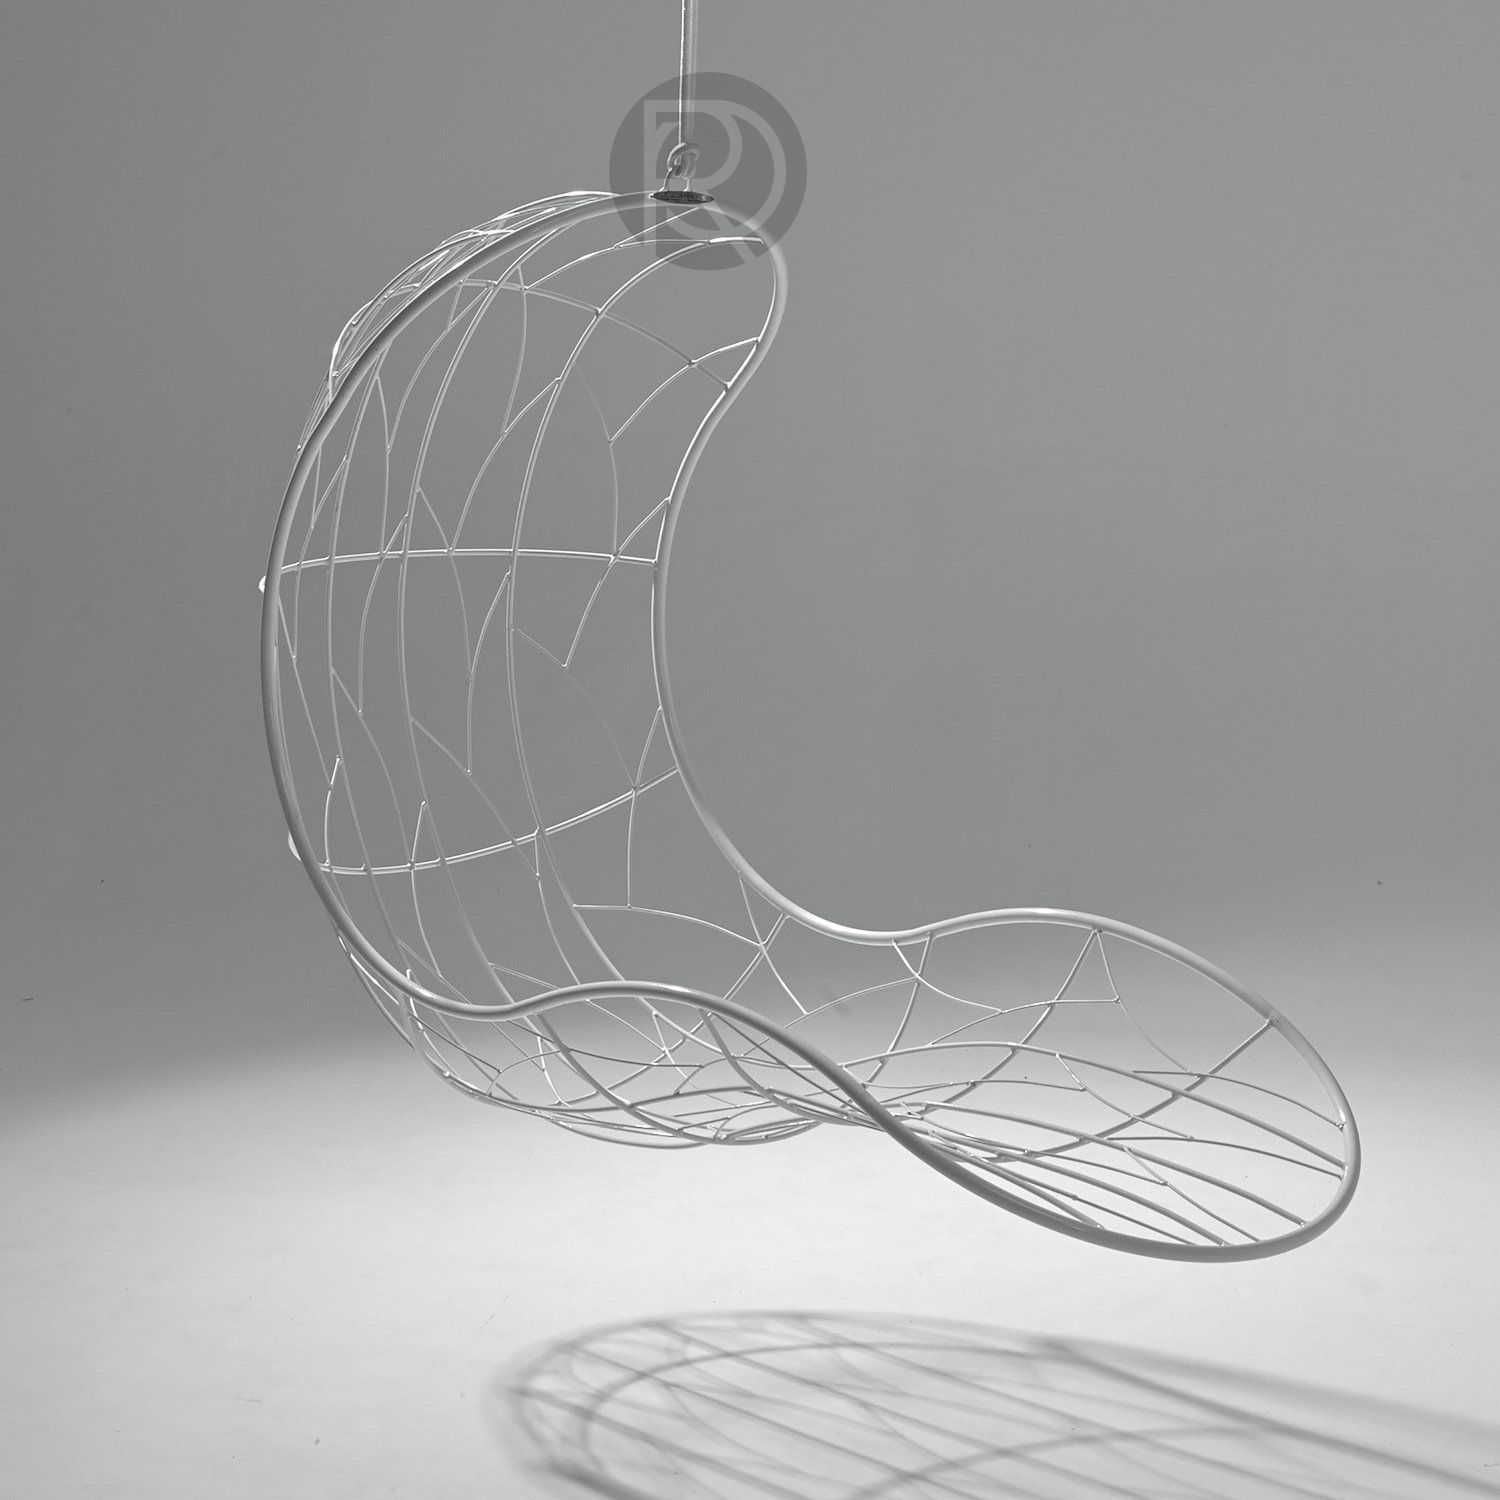 RECLINER chair by Studio Stirling